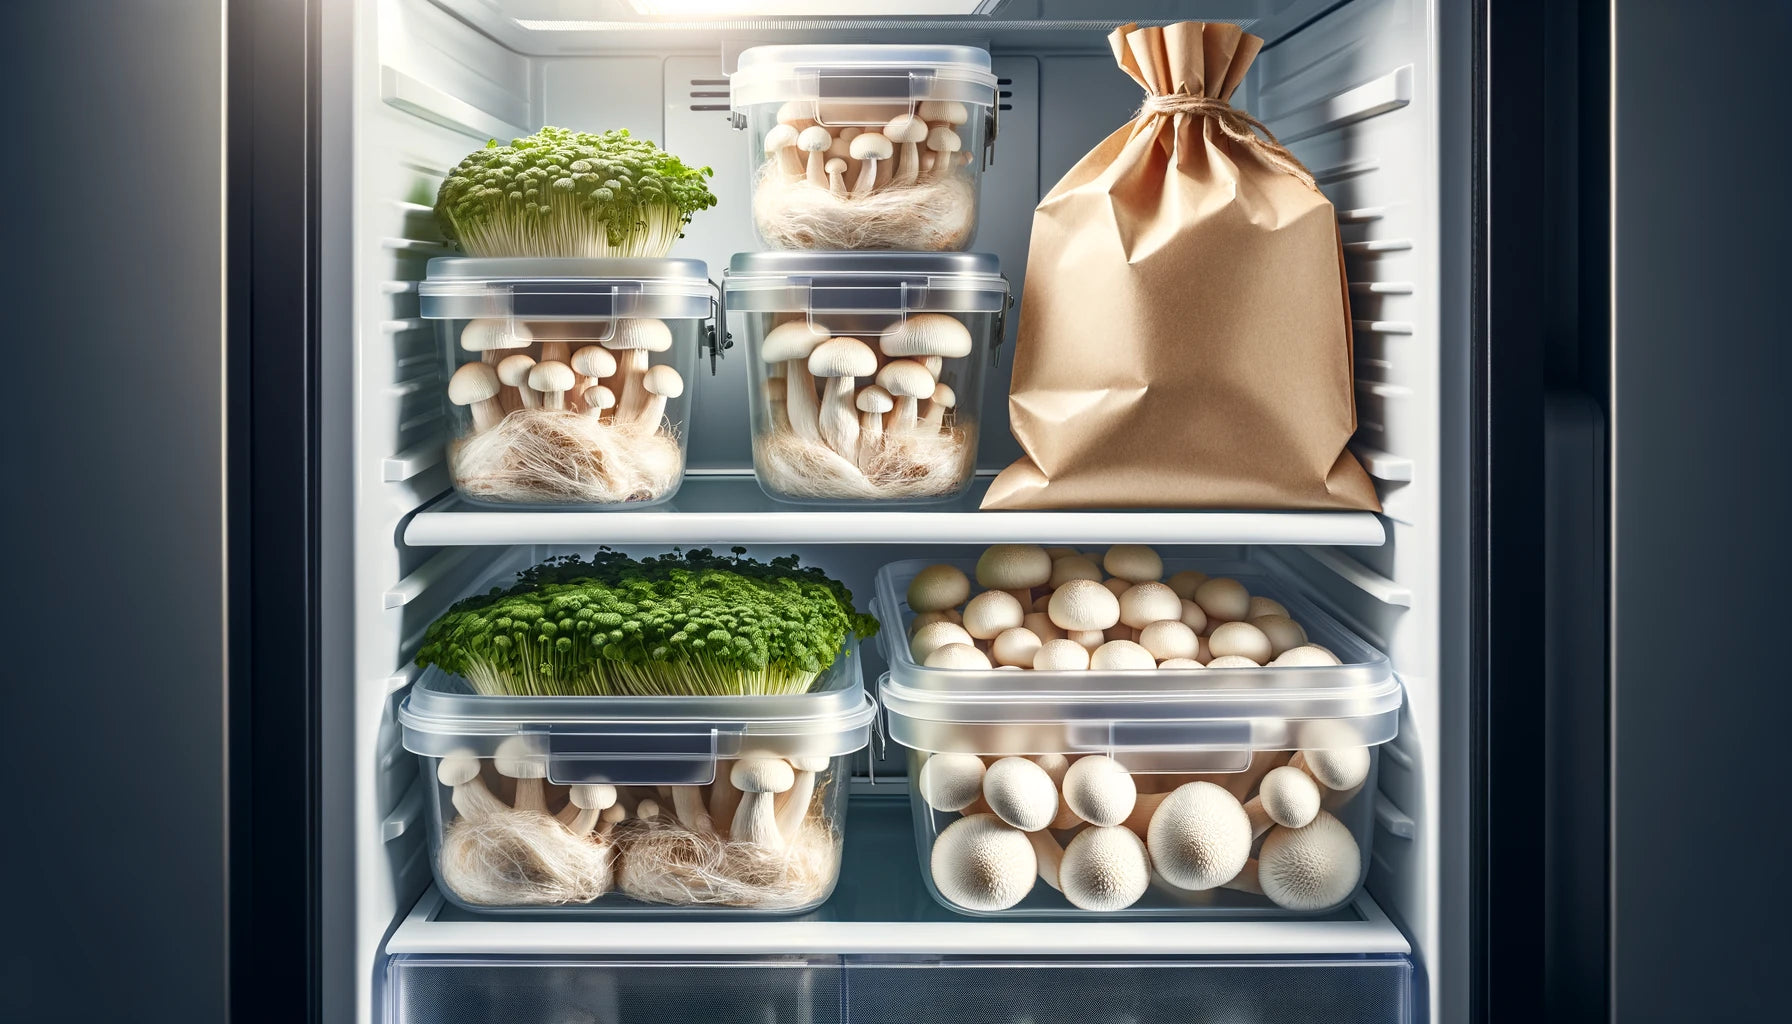 Kitchen Refrigerator with Lion's Mane Mushroom Containers